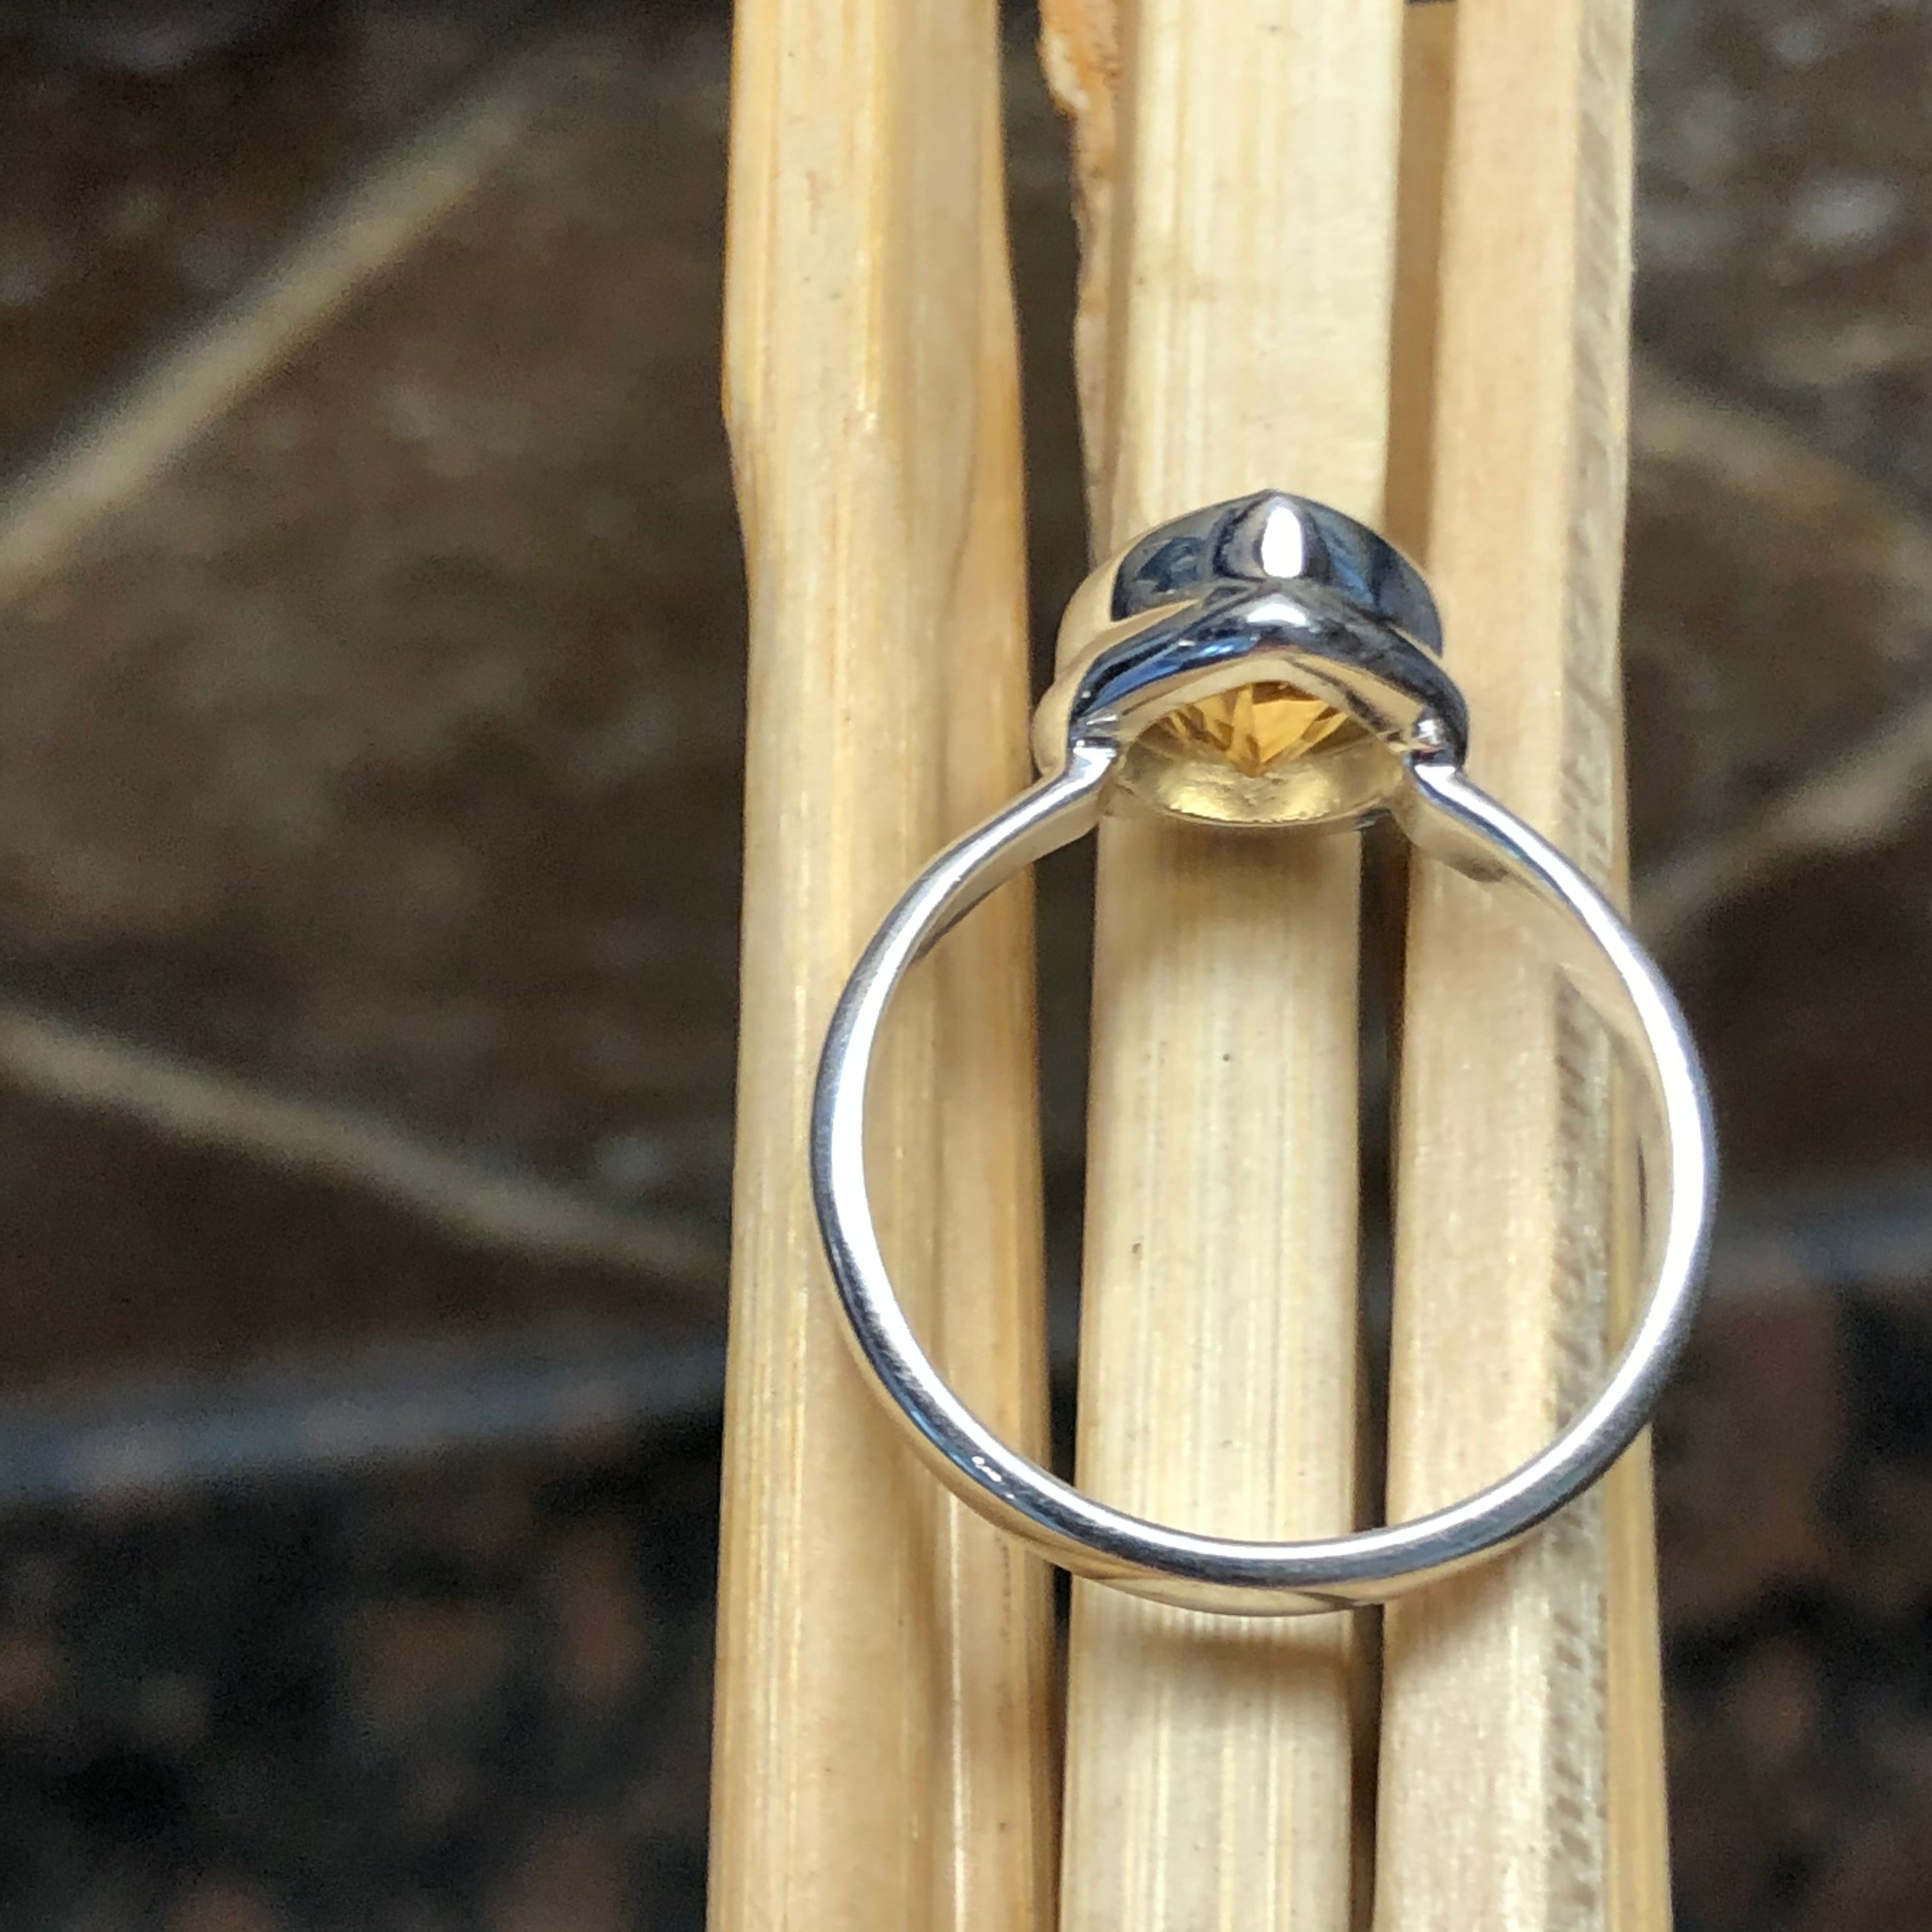 Natural 2ct Golden Citrine 925 Solid Sterling Silver Ring Size 7.75, 8.75, 9.25 - Natural Rocks by Kala